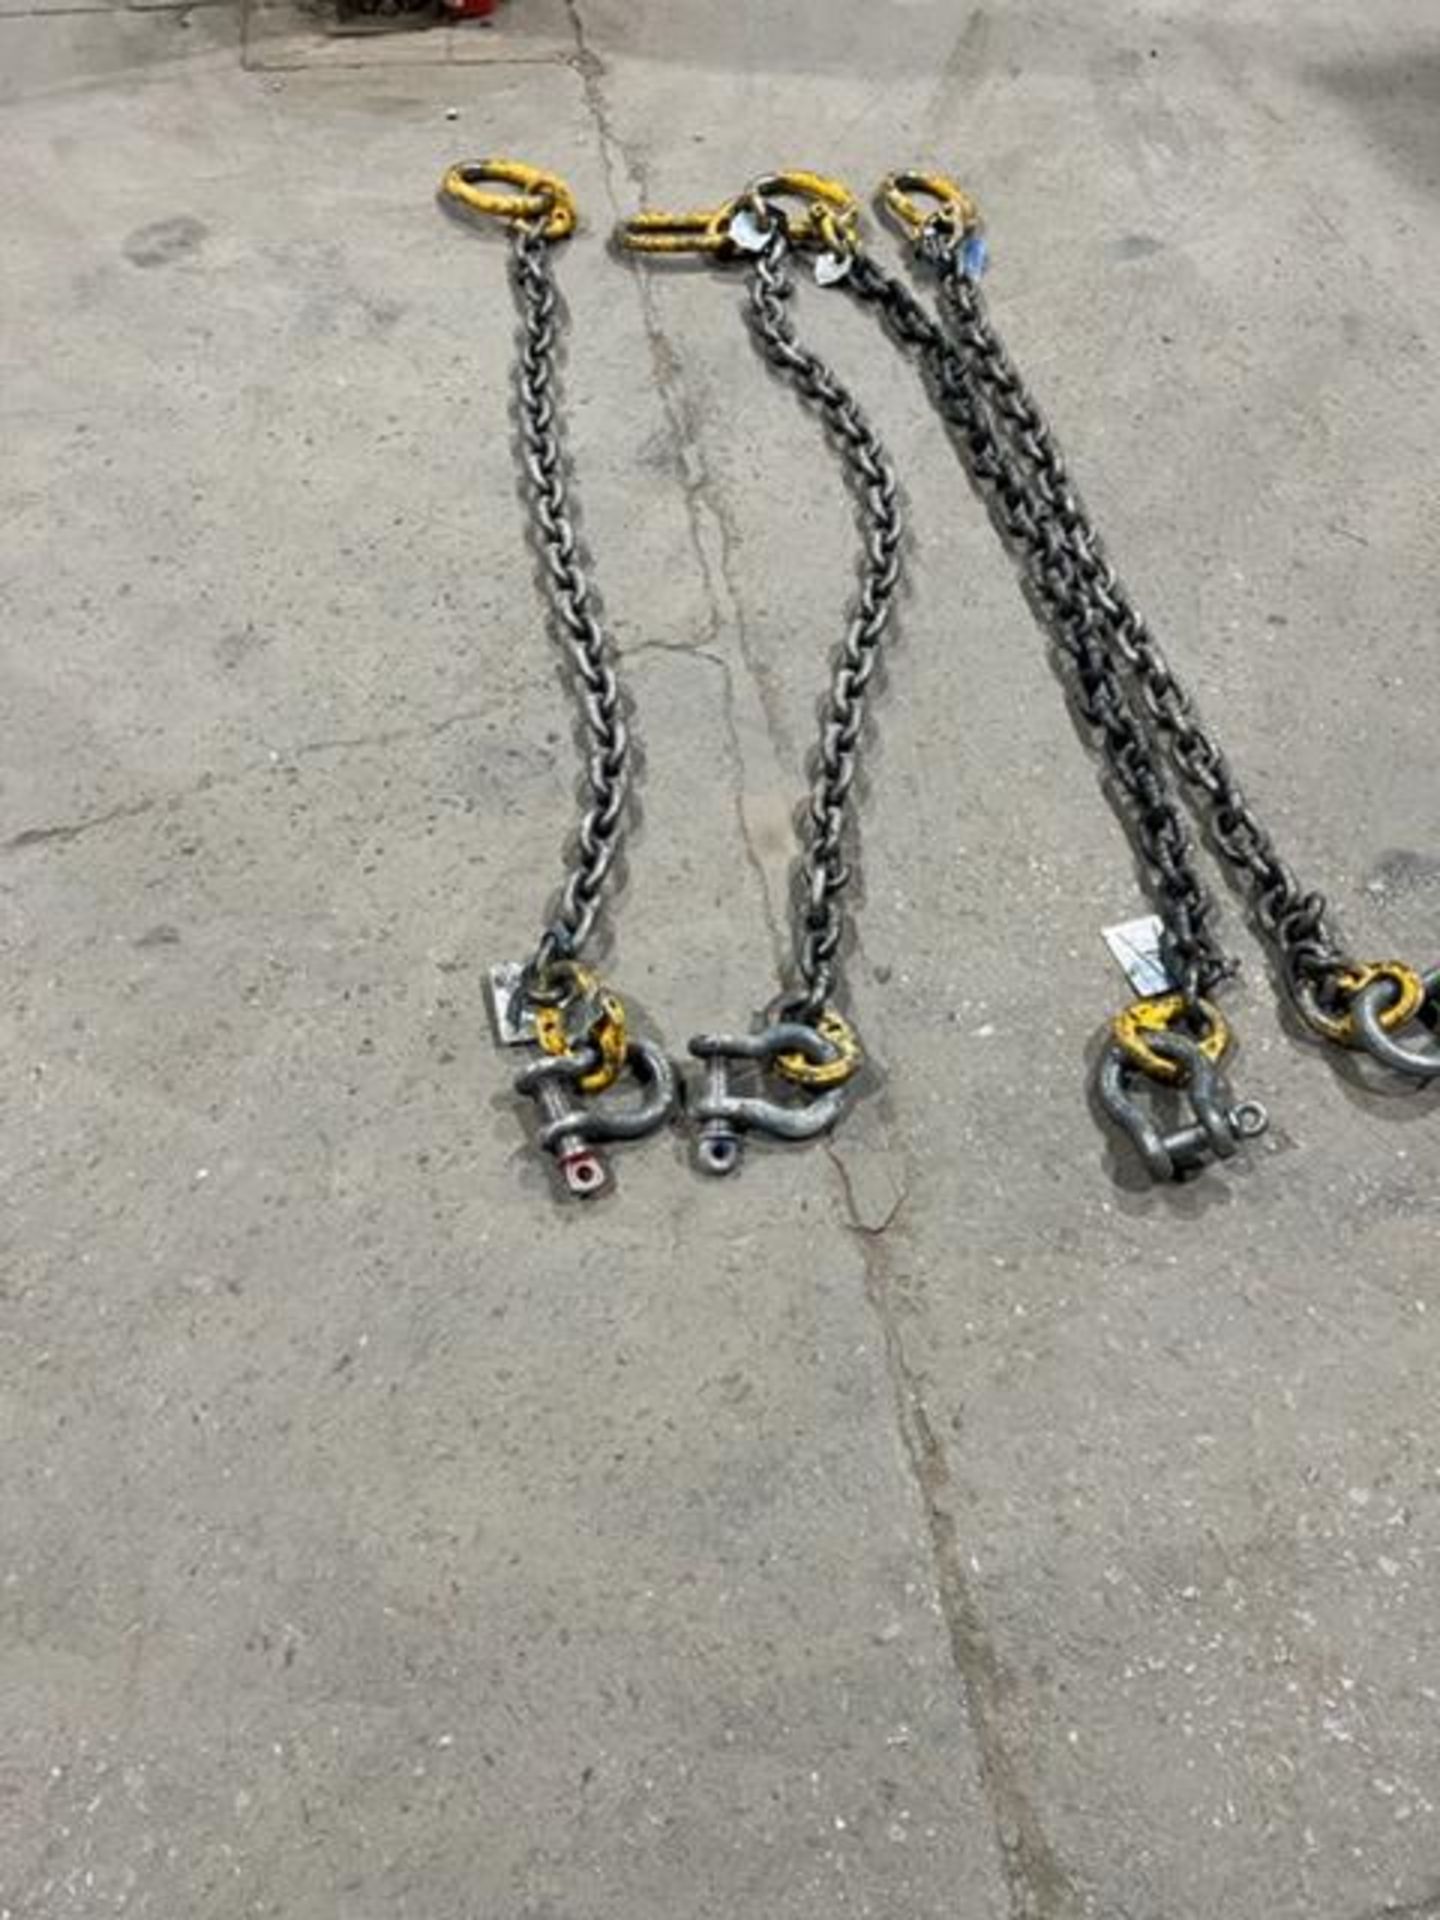 Lot of 4 Lifting Chain 8 ton Each Hook with Shakels *** FROM 5-STAR RIGGING - Image 2 of 2